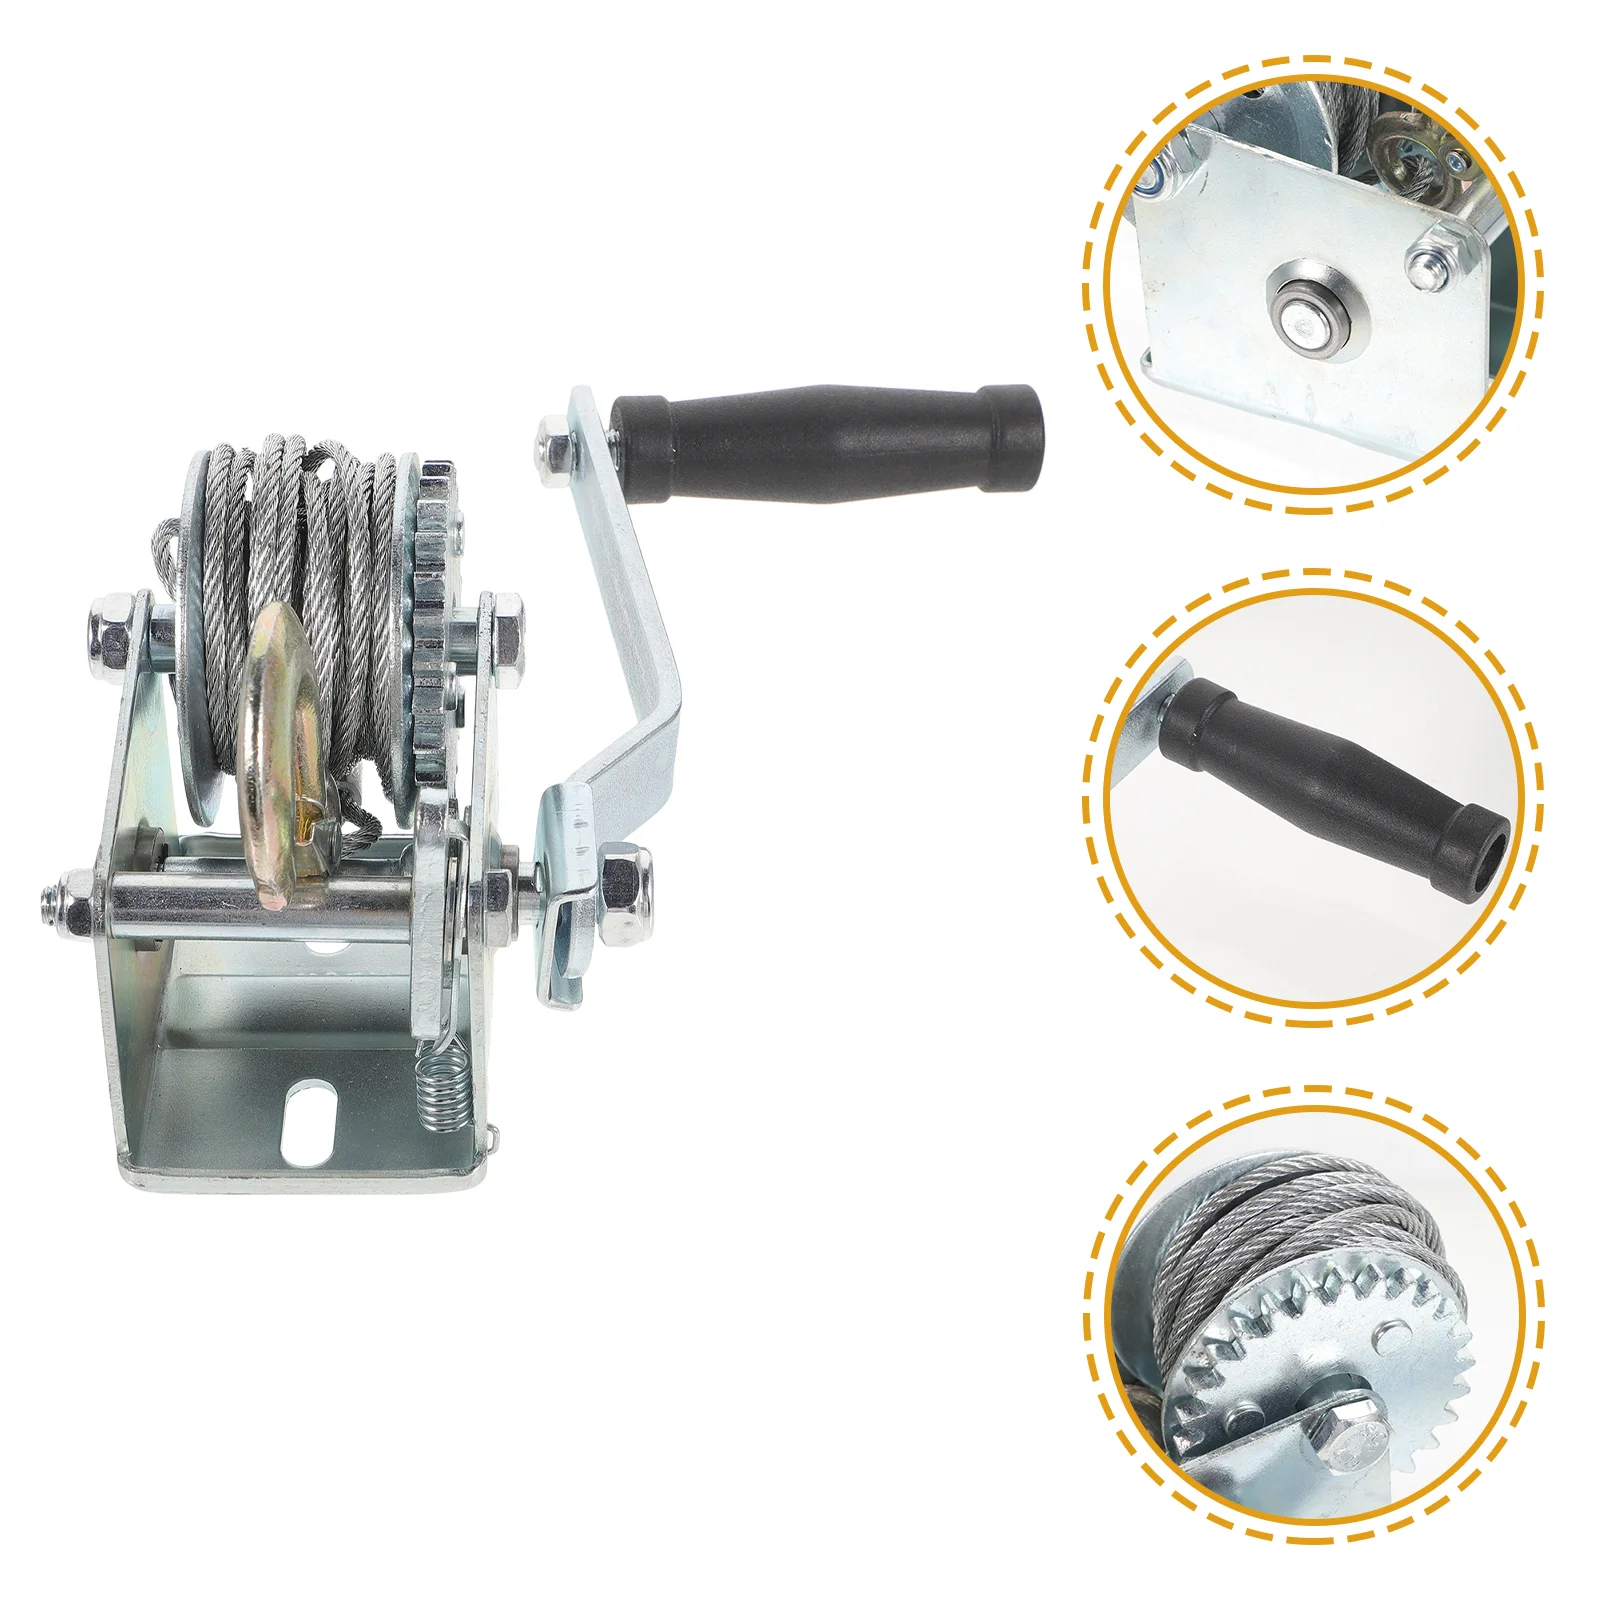 

Hand Winch Trailer Manual Loading Household Ratchet Metal Gear Crank 500 Lb Mini Boat Winches